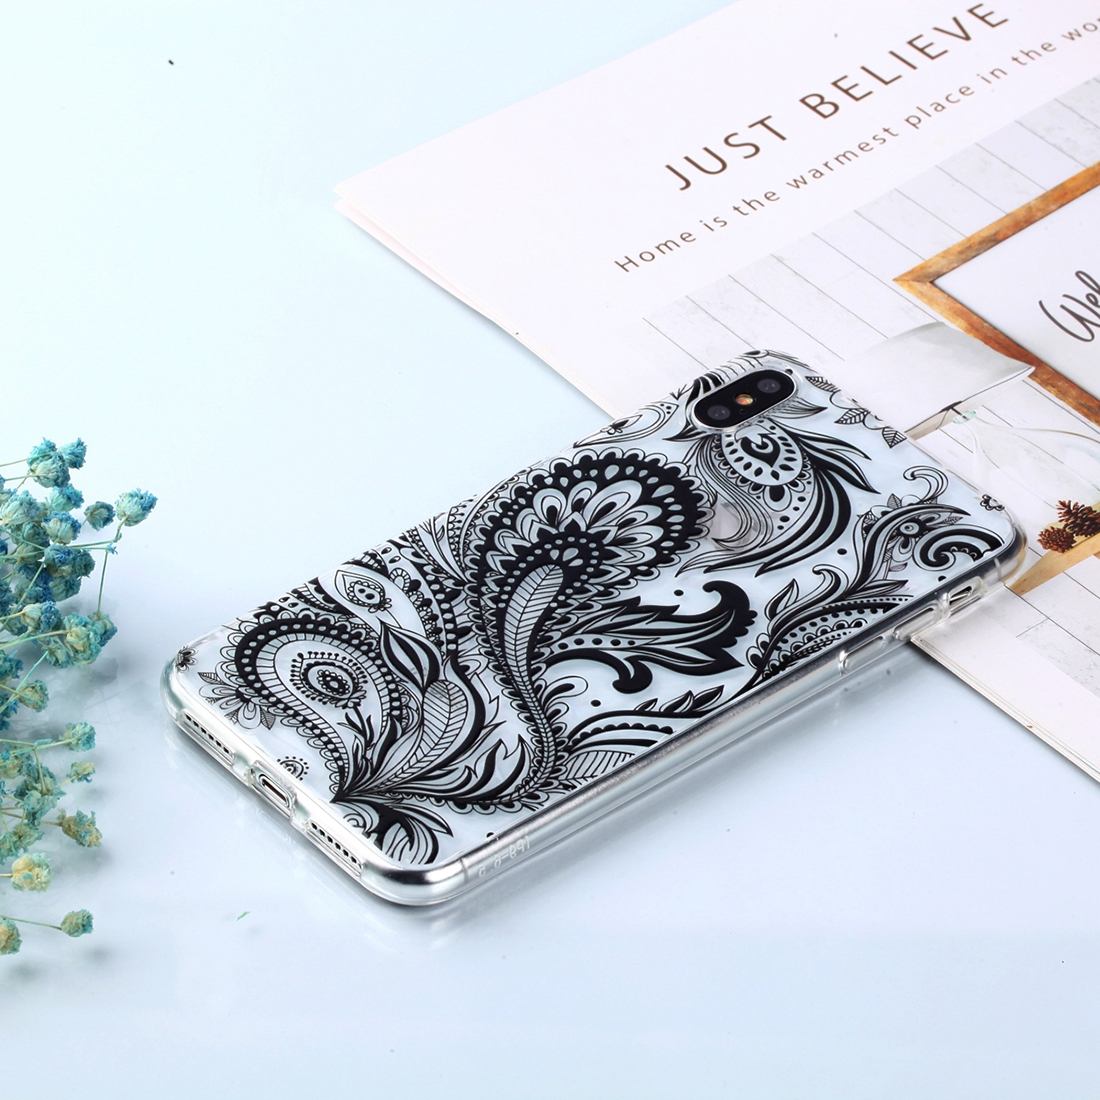 For iPhone XS MAX Cover,Shockproof Slim Thin Soft Mobile Phone Case,Phoenix Tail